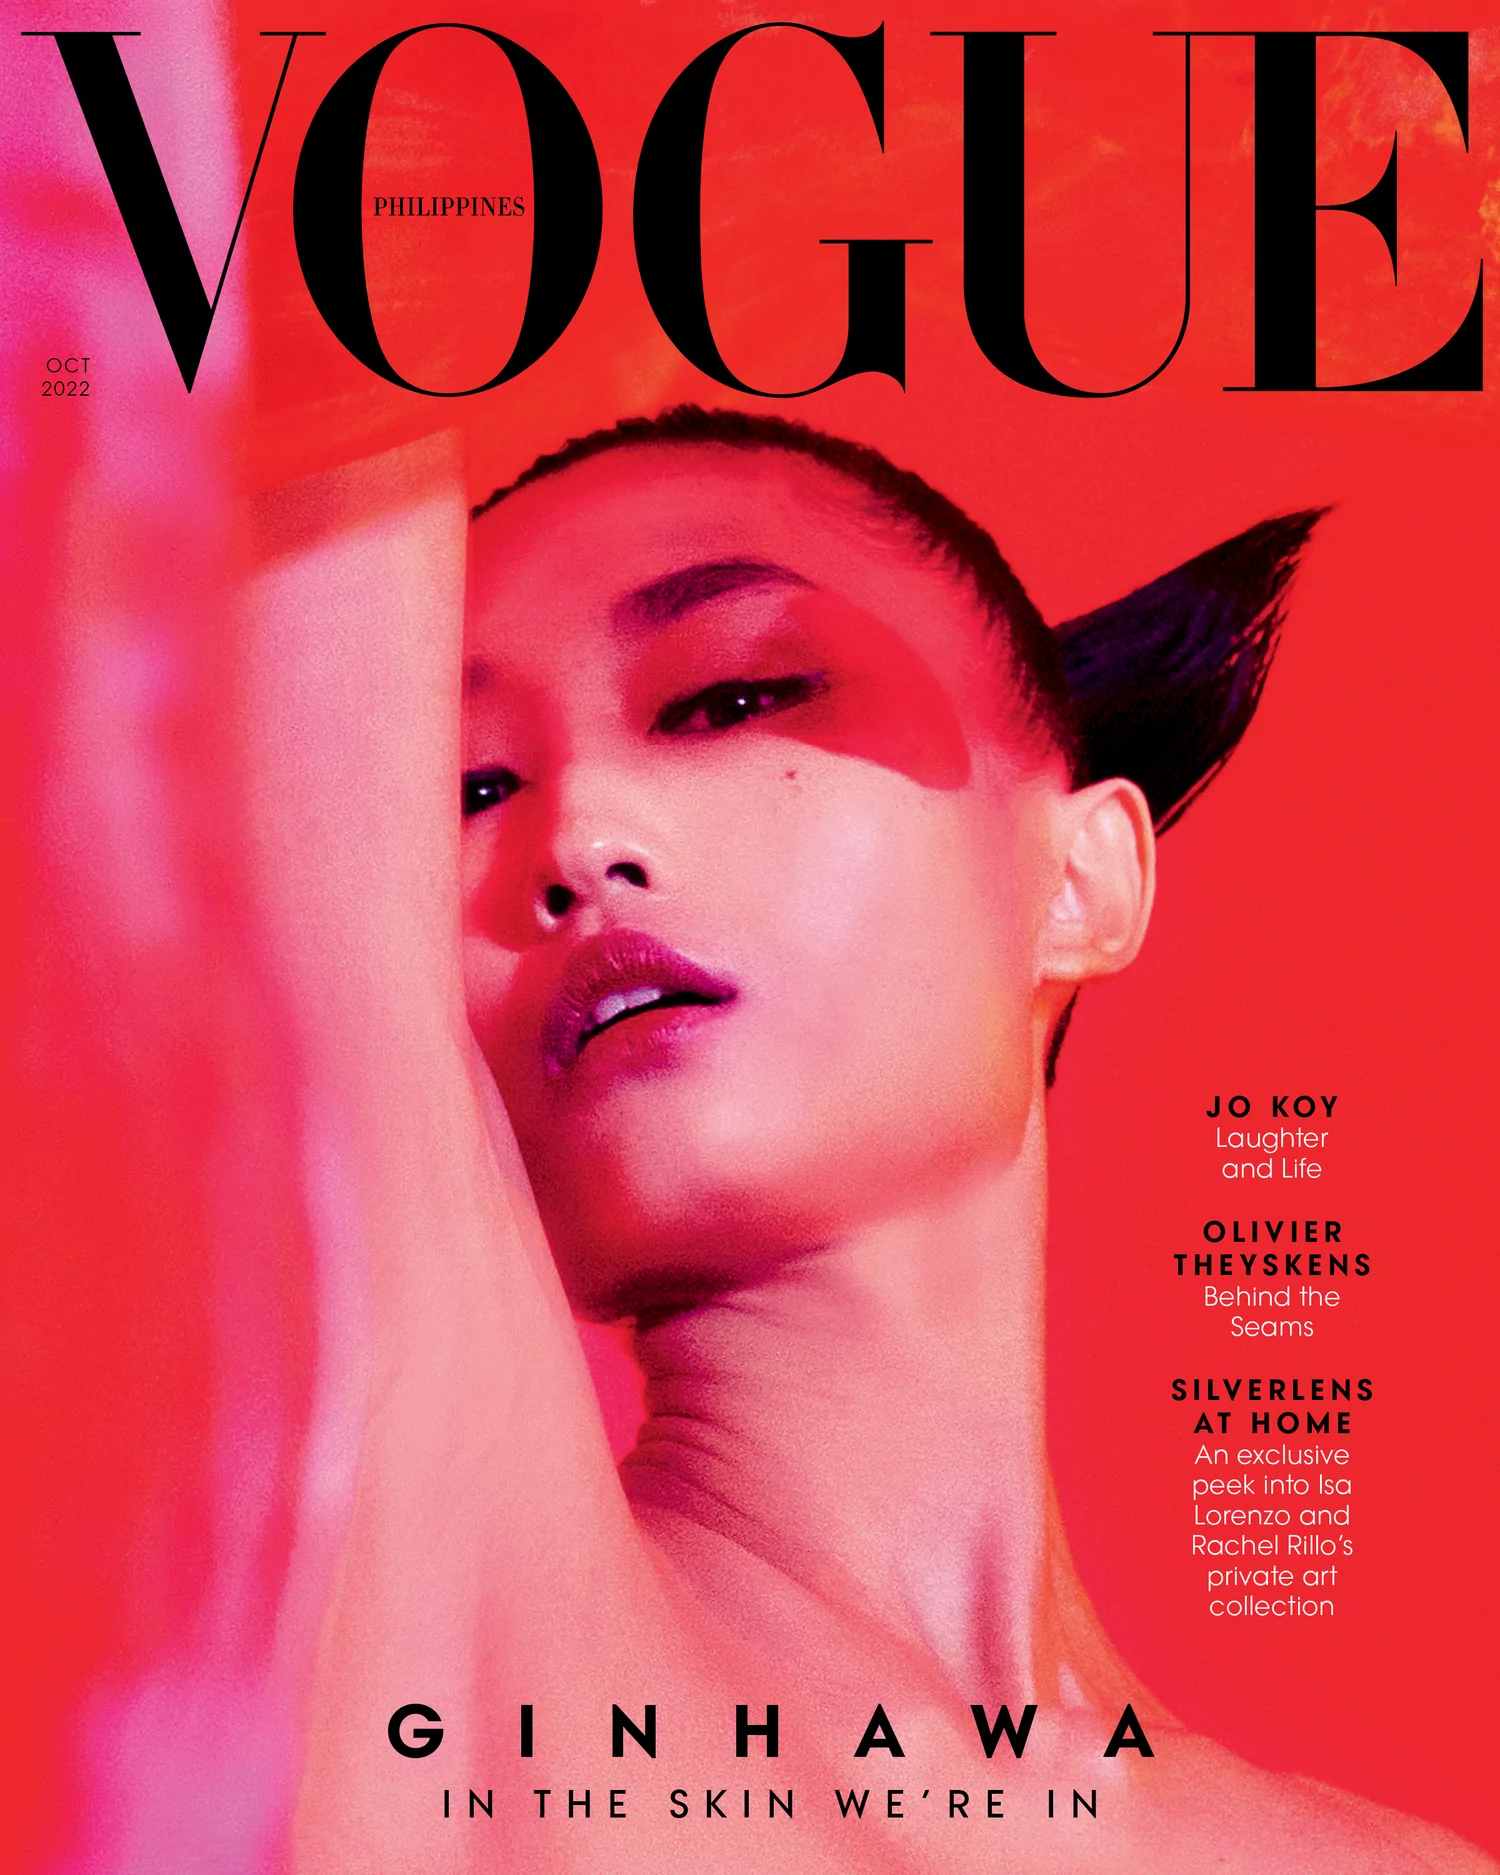 Ica Dy covers Vogue Philippines October 2022 by Koji Arboleda